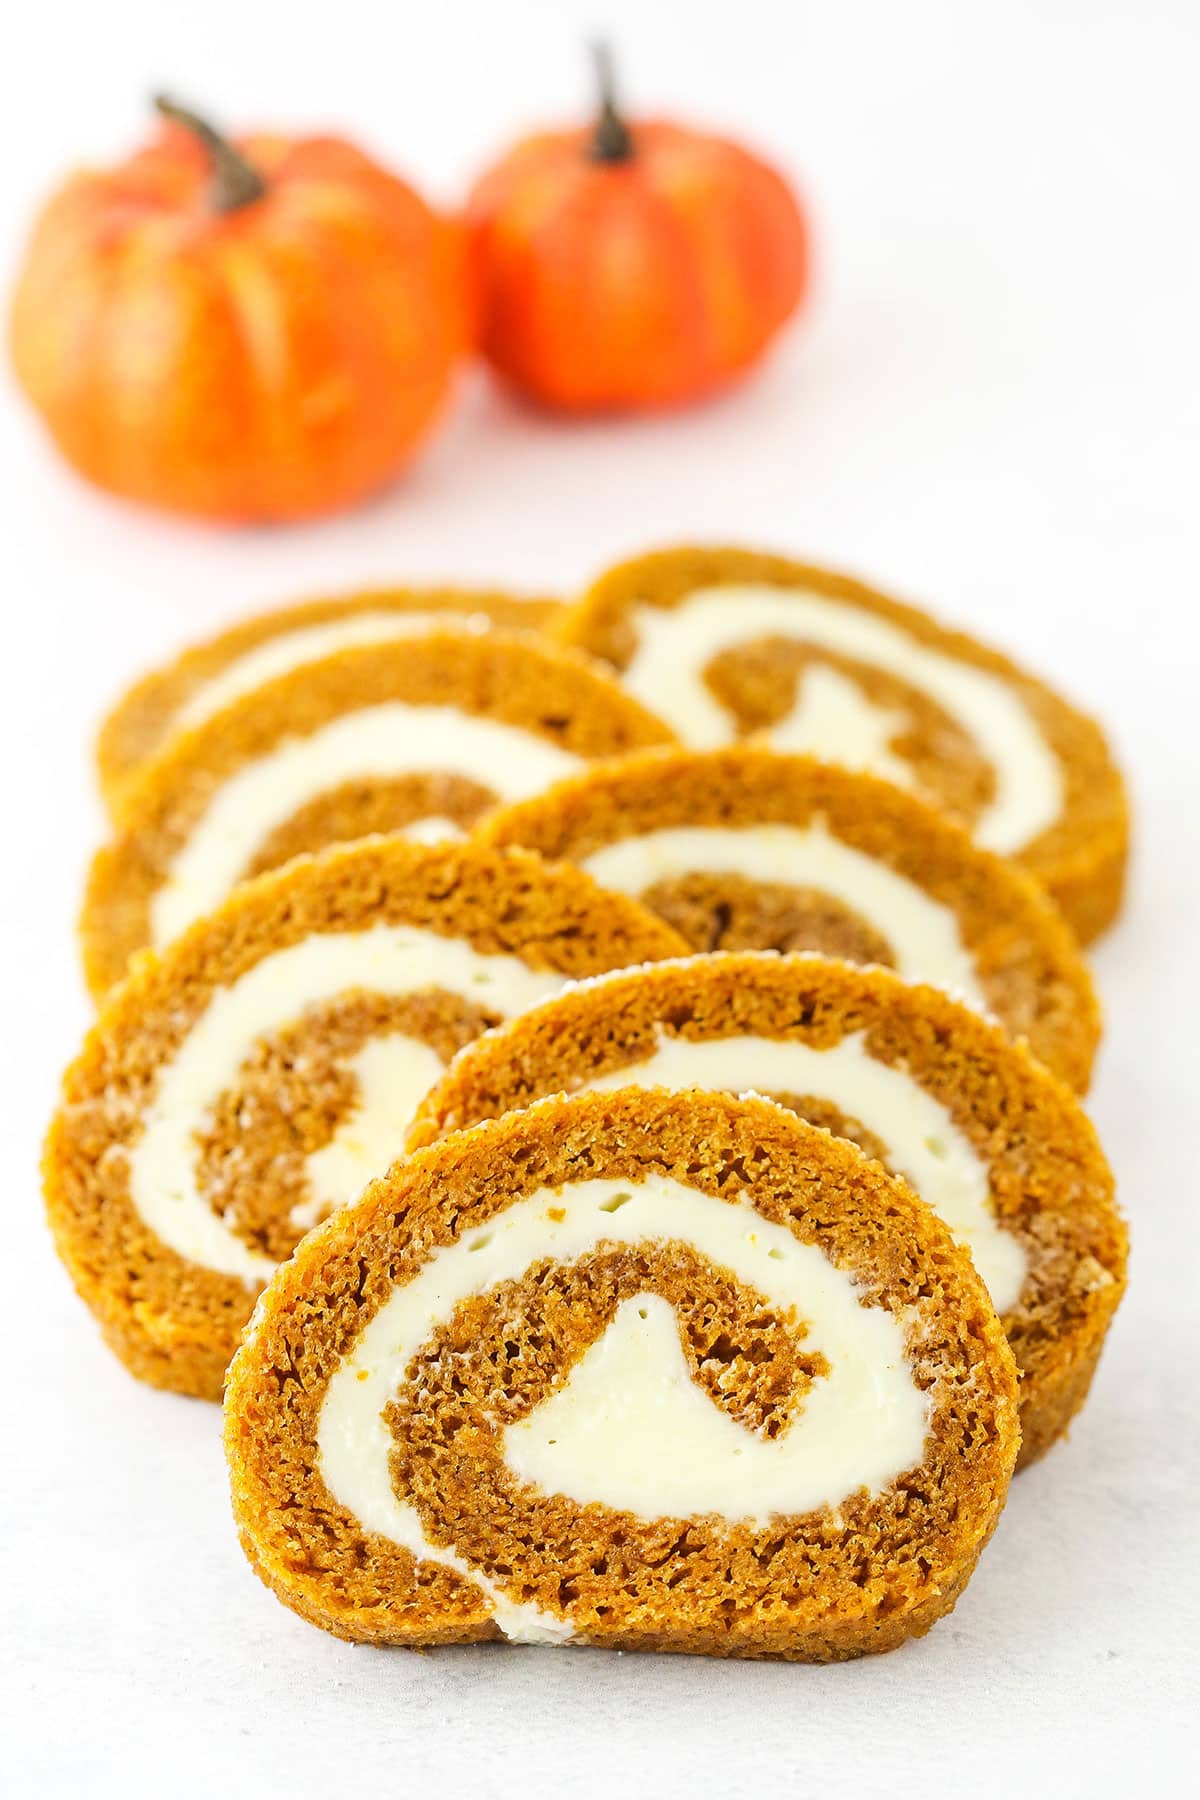 Seven slices of Pumpkin Roll Cake overlapping each other on a white table top.